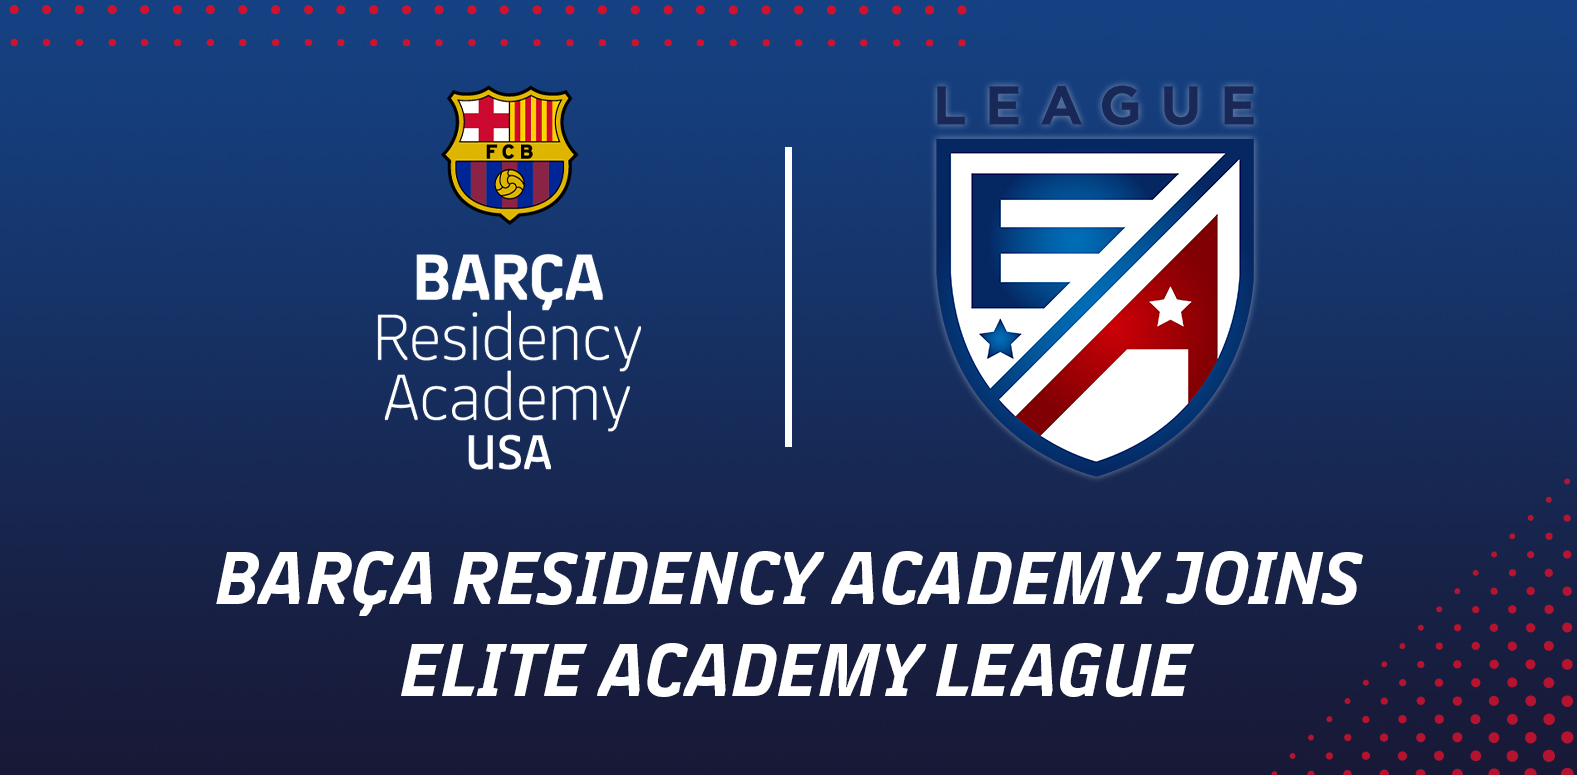 Barca Residency Academy adds the Elite Academy League to competition platform